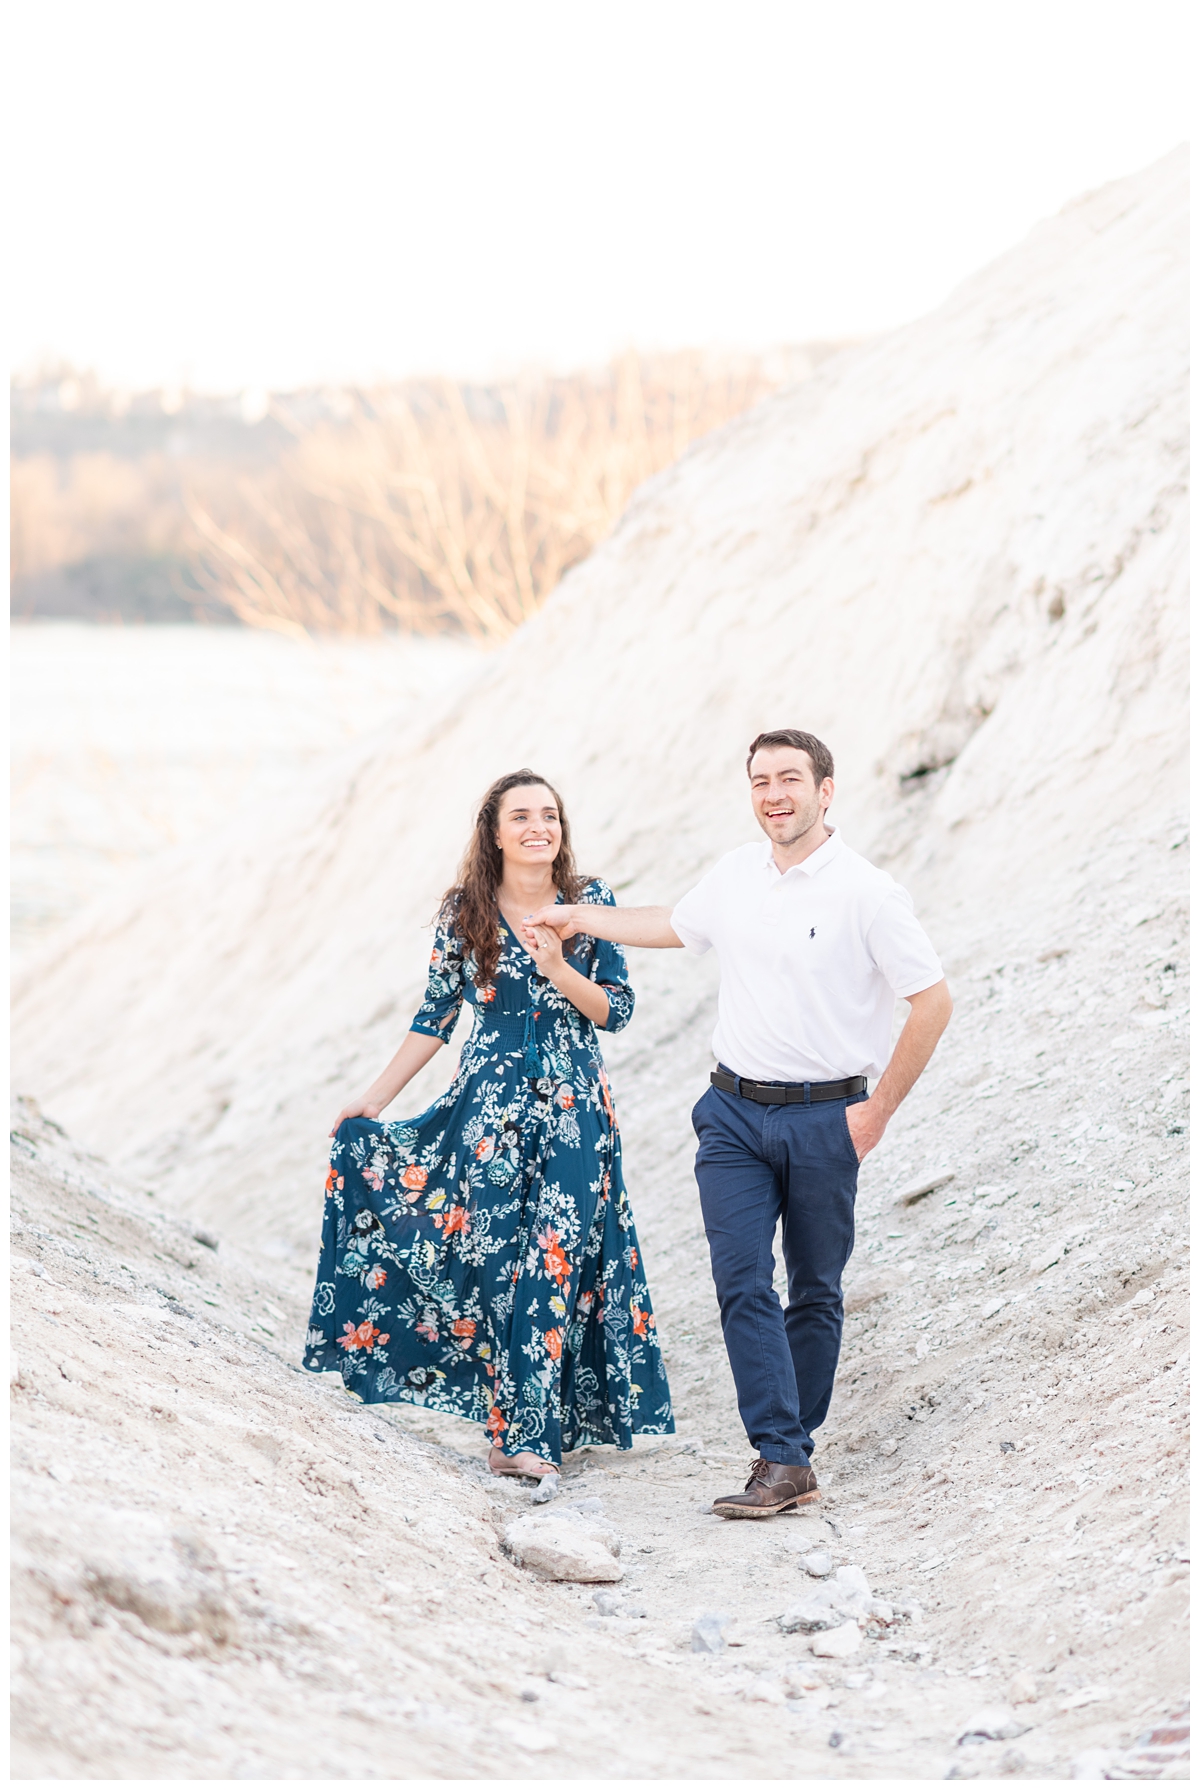 Engagement photos at White Cliffs of Conoy in Marrietta, PA